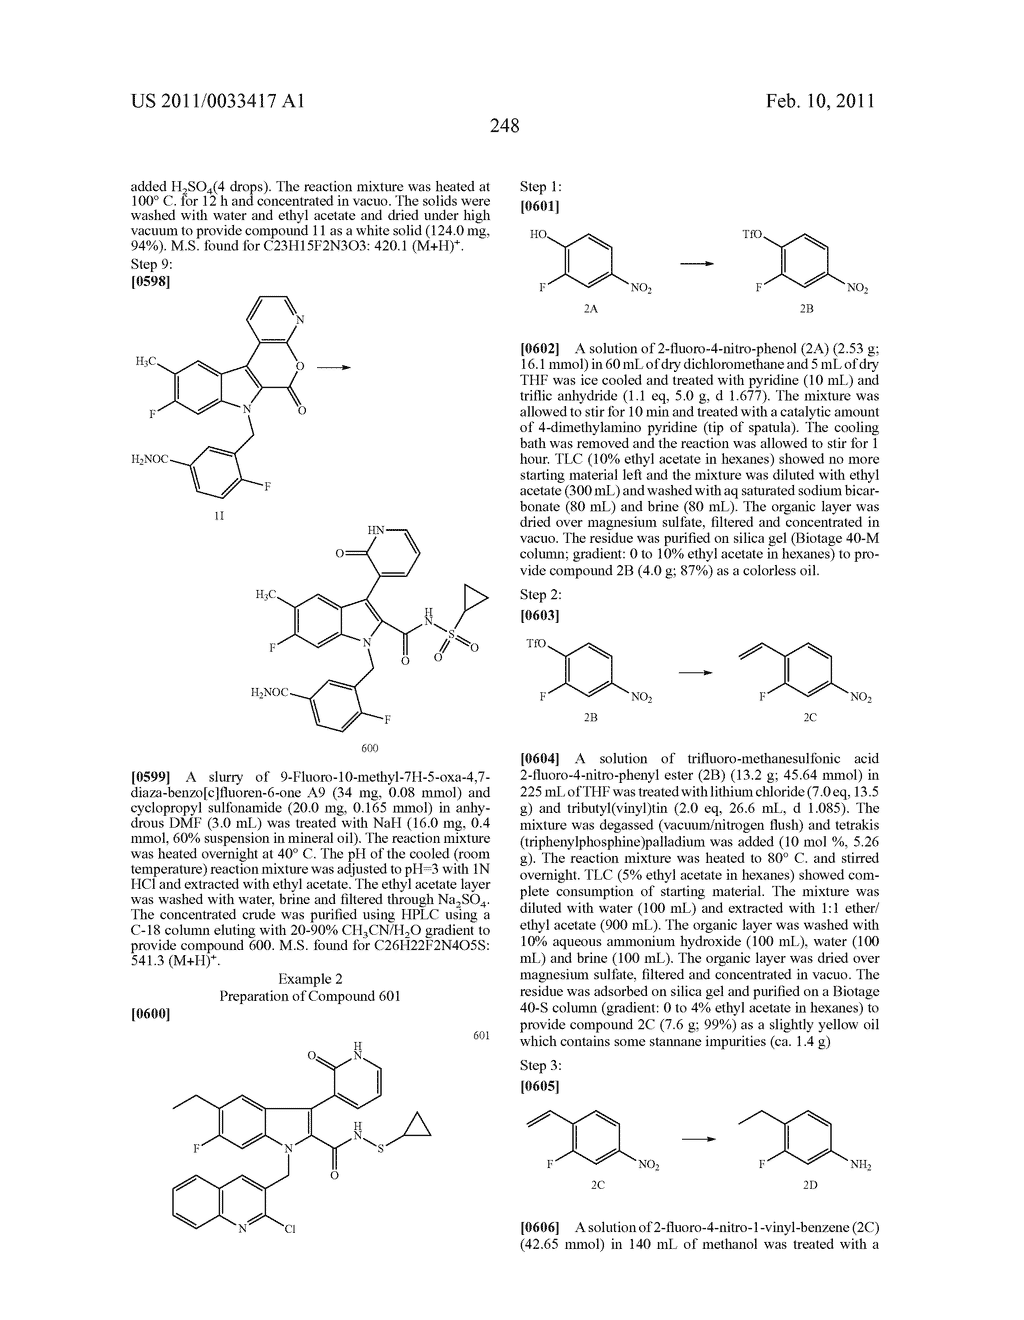 2,3-SUBSTITUTED INDOLE DERIVATIVES FOR TREATING VIRAL INFECTIONS - diagram, schematic, and image 249